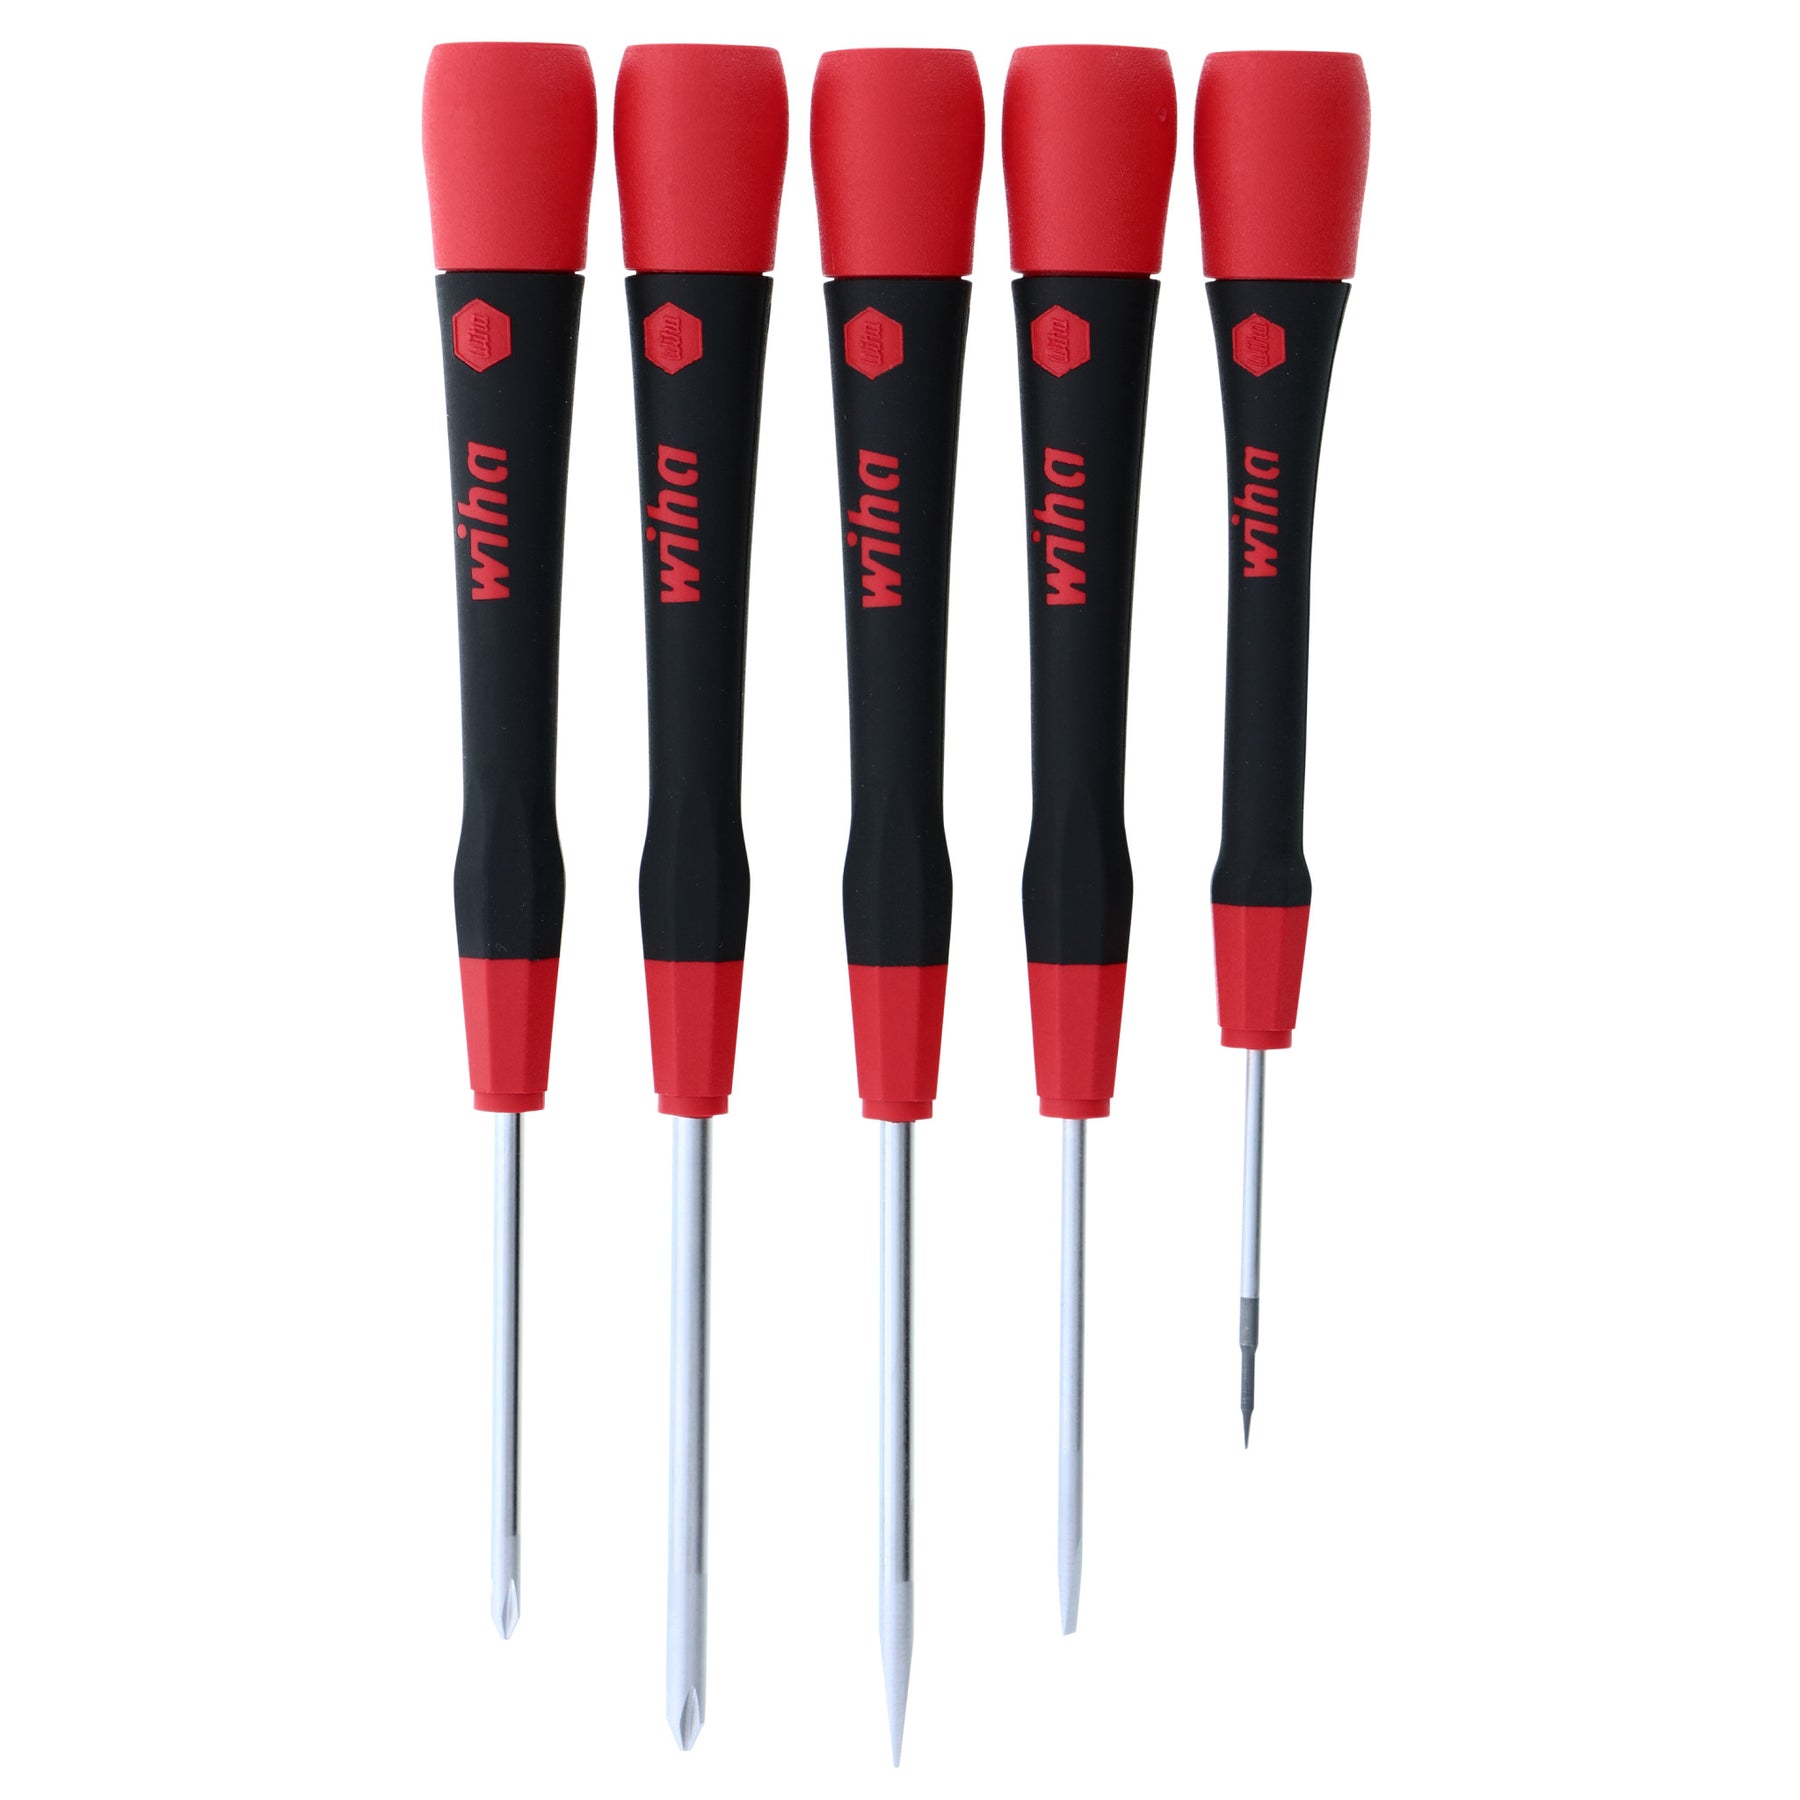 5 Piece PicoFinish Slotted and Phillips Precision Screwdriver Set